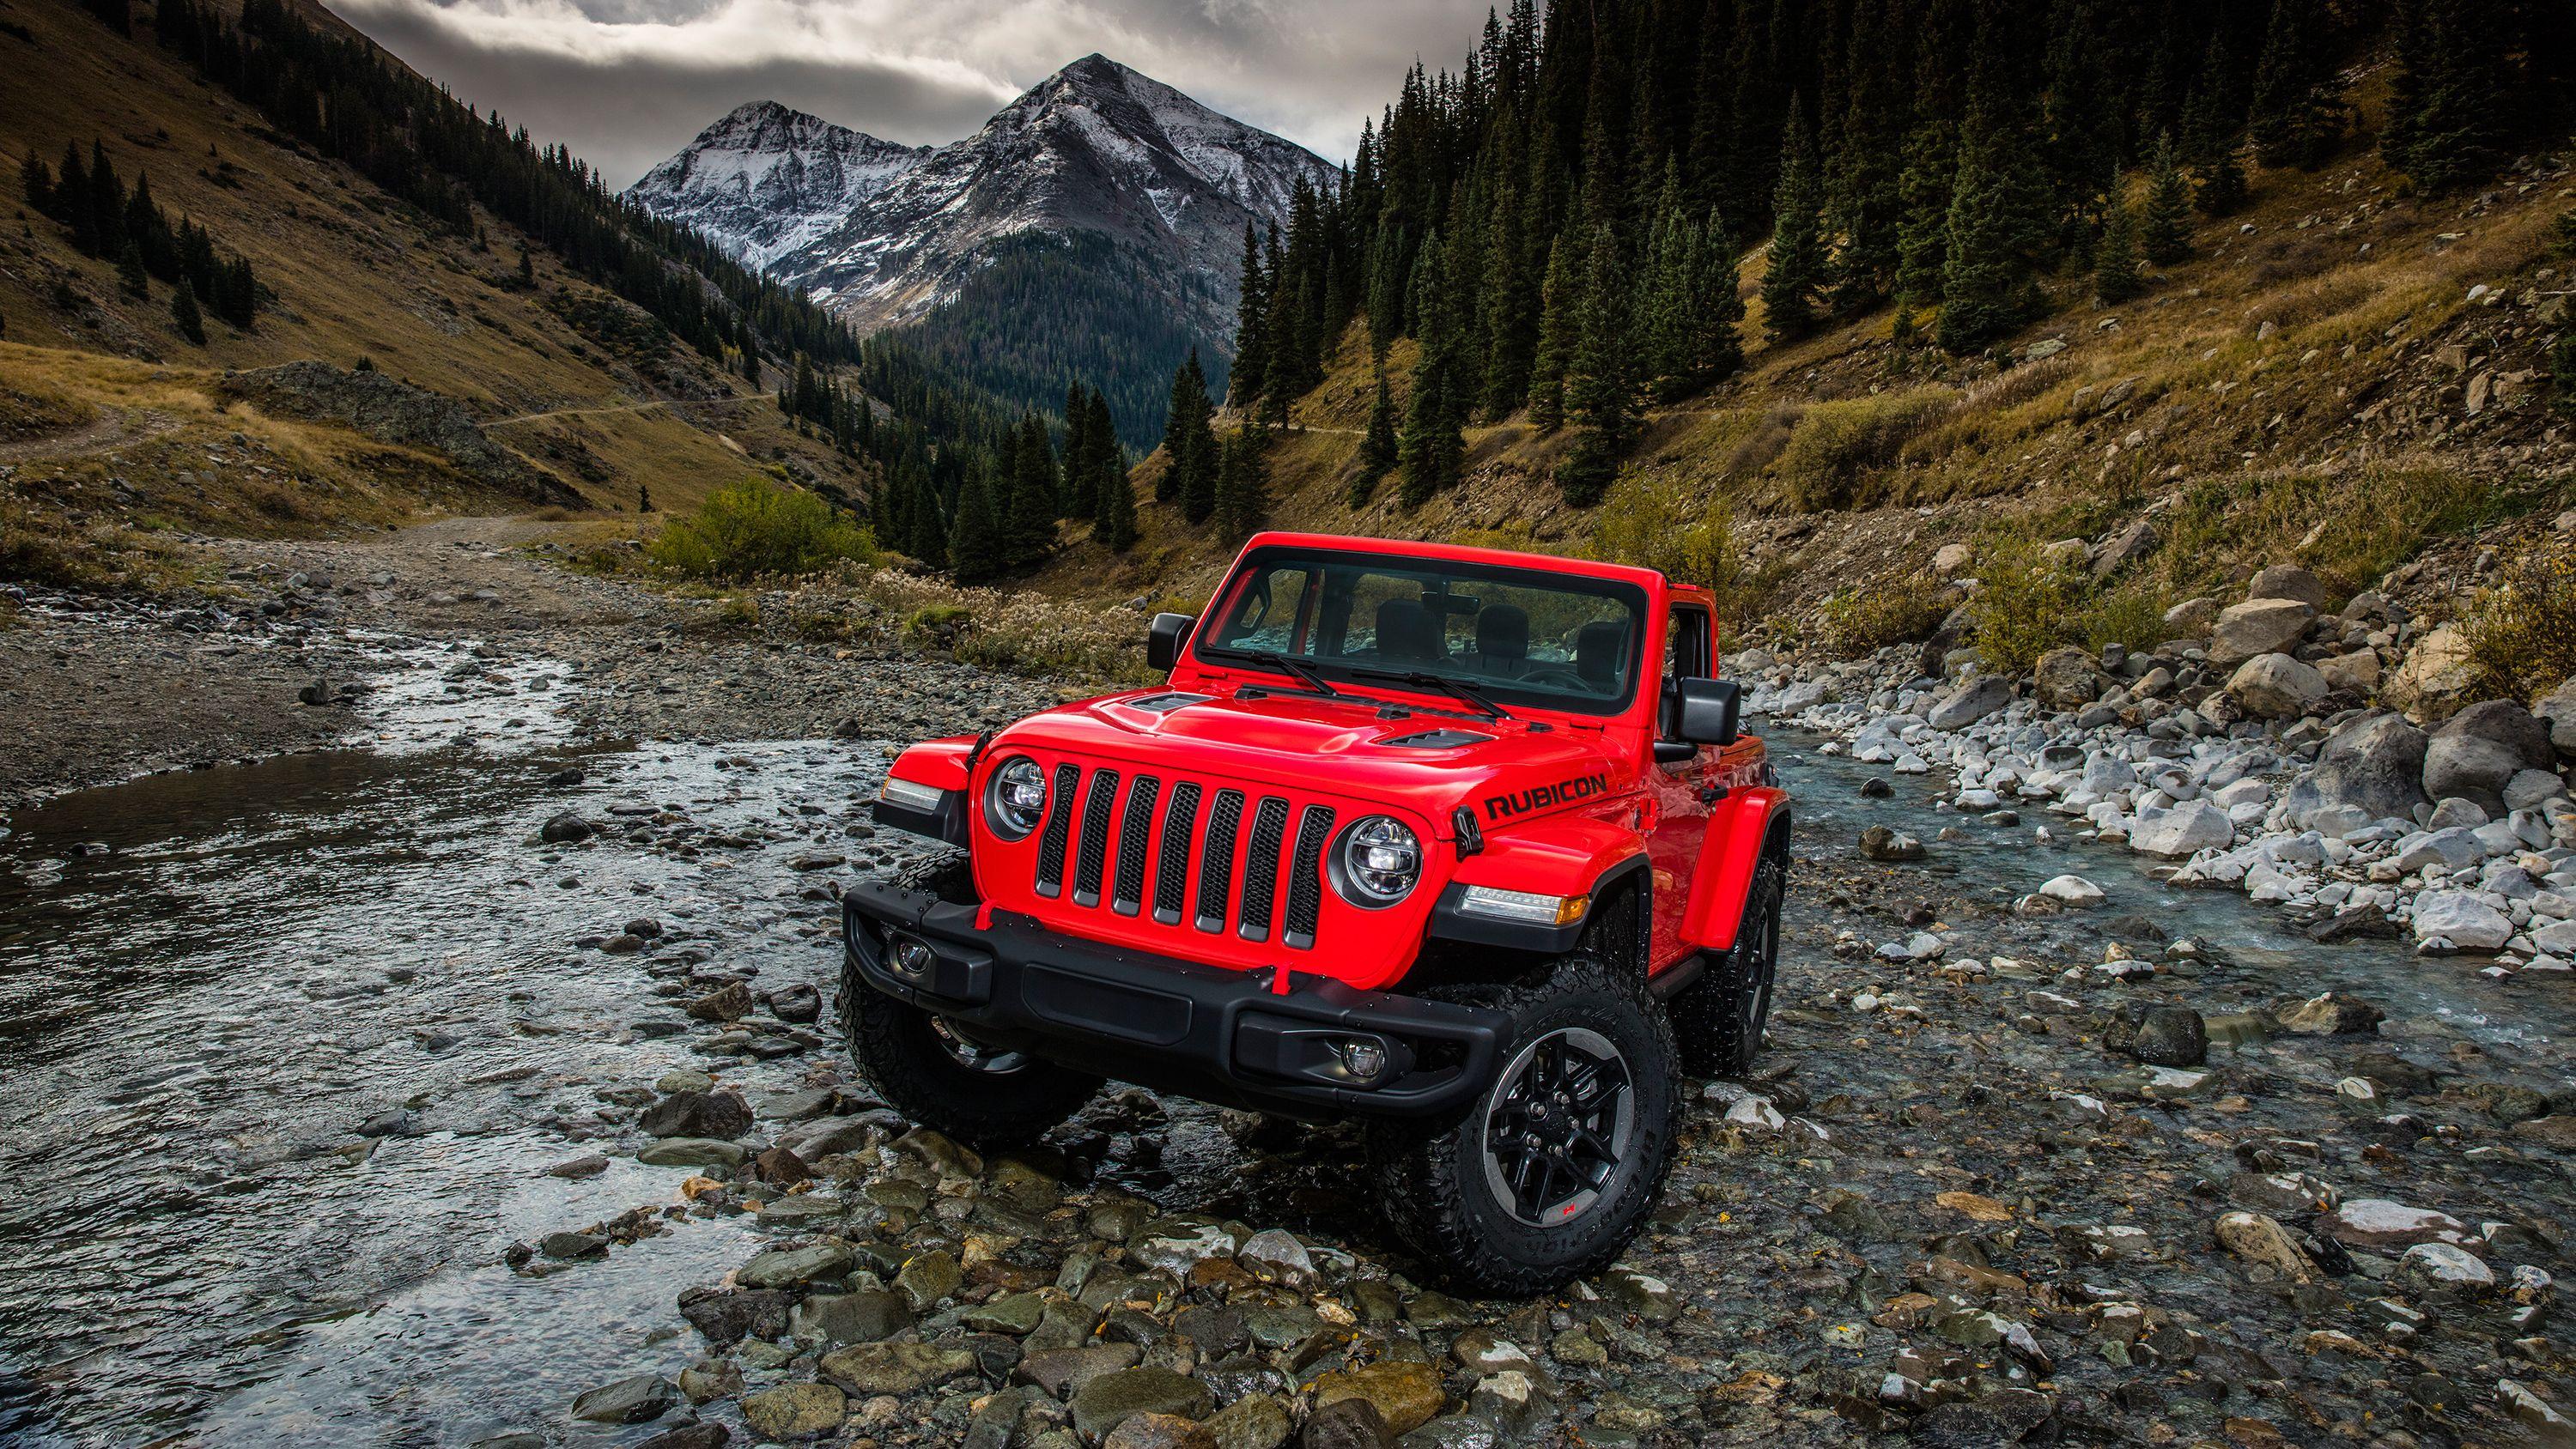 4k Jeep Wallpapers Top Free 4k Jeep Backgrounds Wallpaperaccess